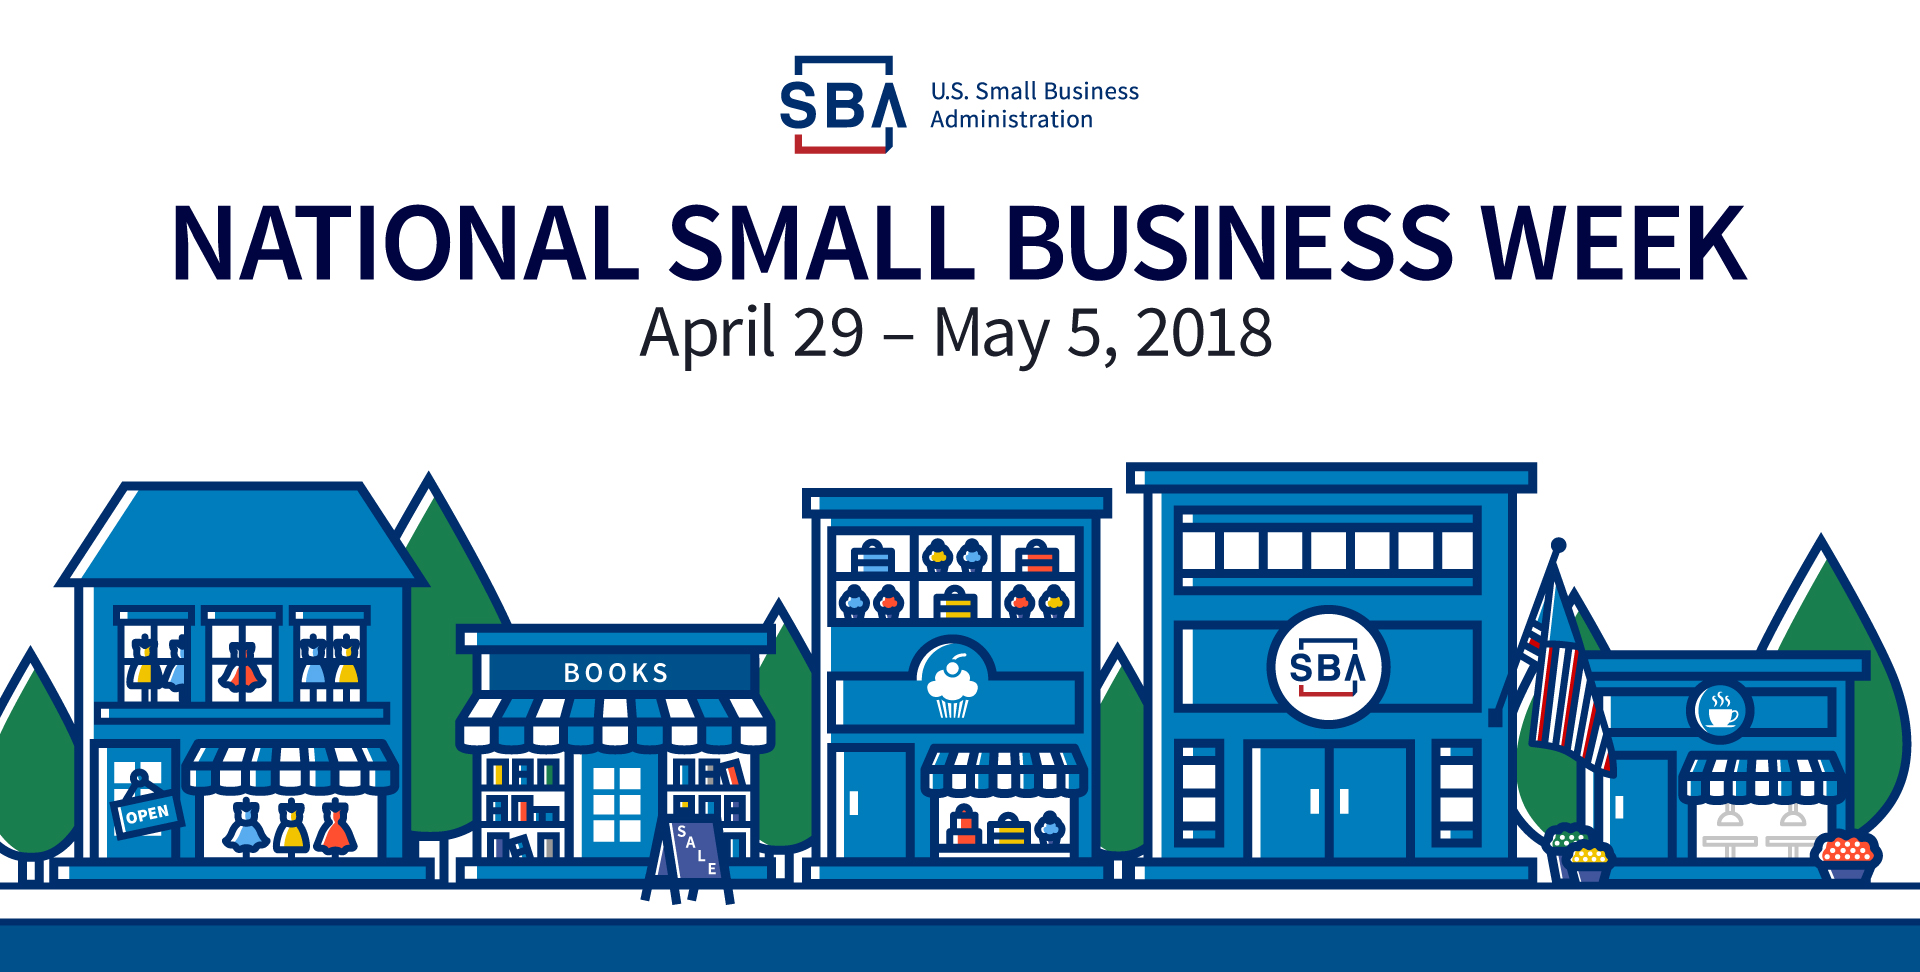 How to Celebrate Entrepreneurs with National Small Business Week